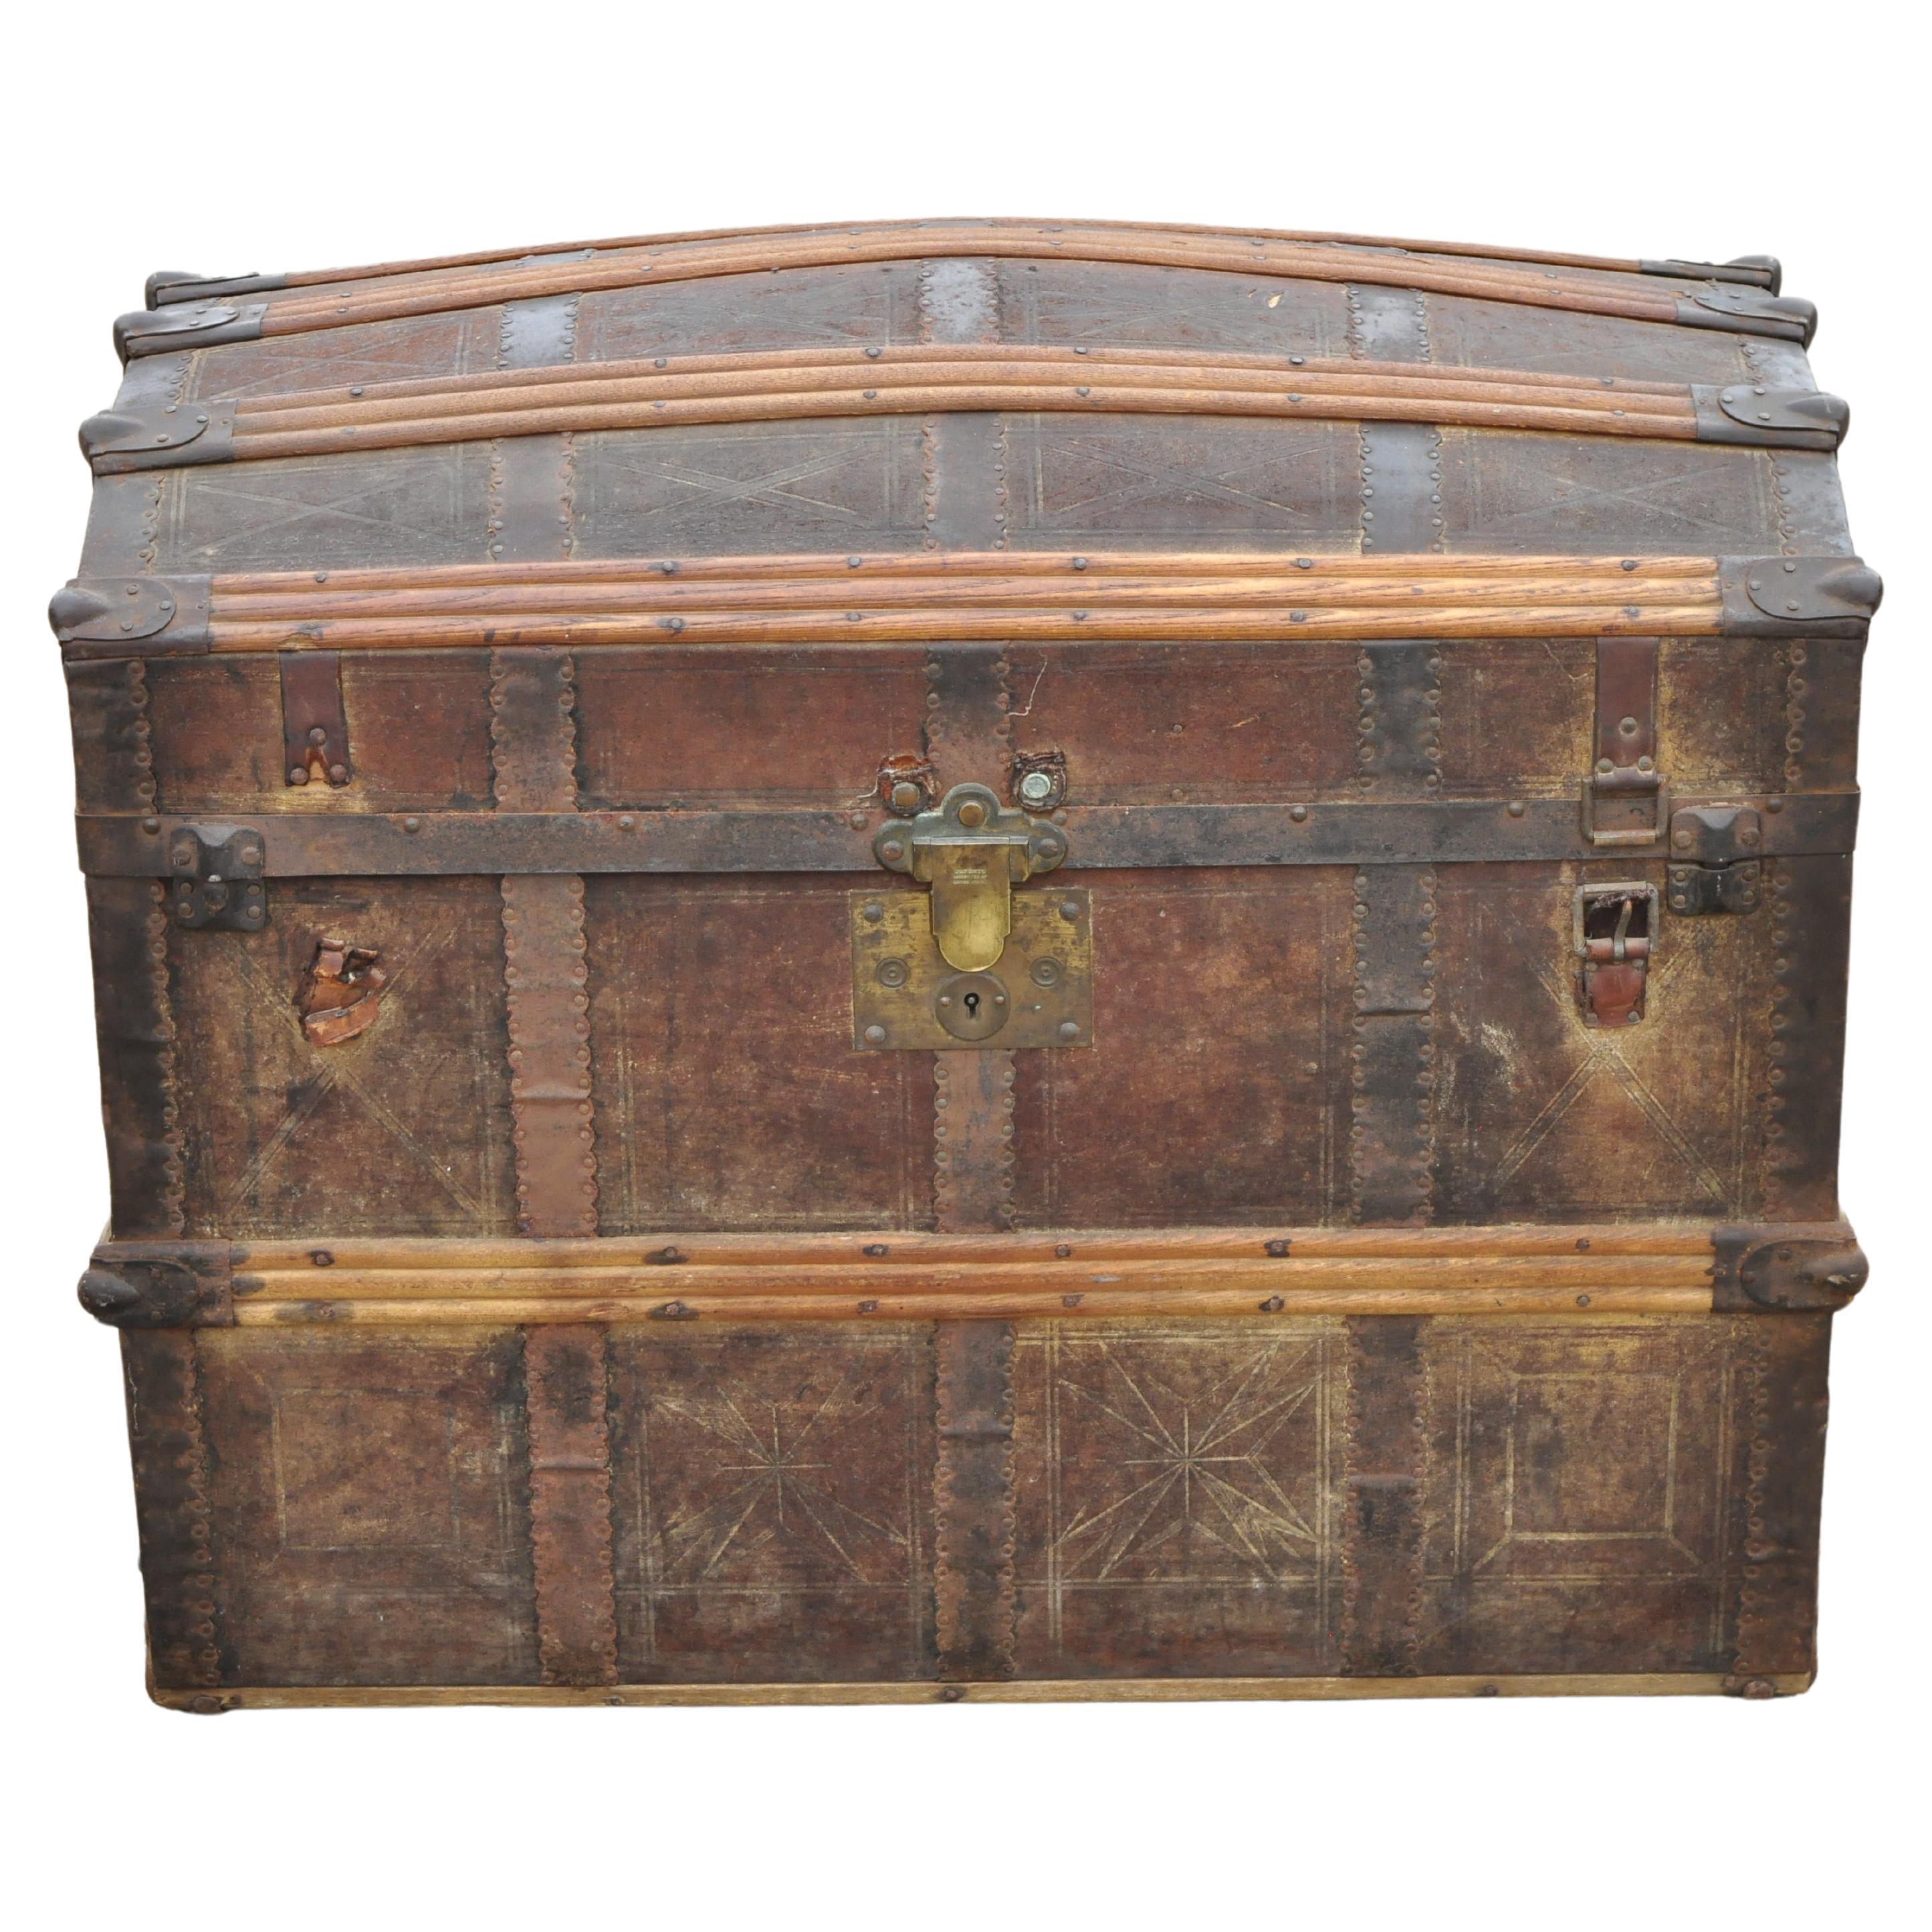 Antique Dome Top Wood Leather Metal Distressed Pirates Treasure Chest Trunk